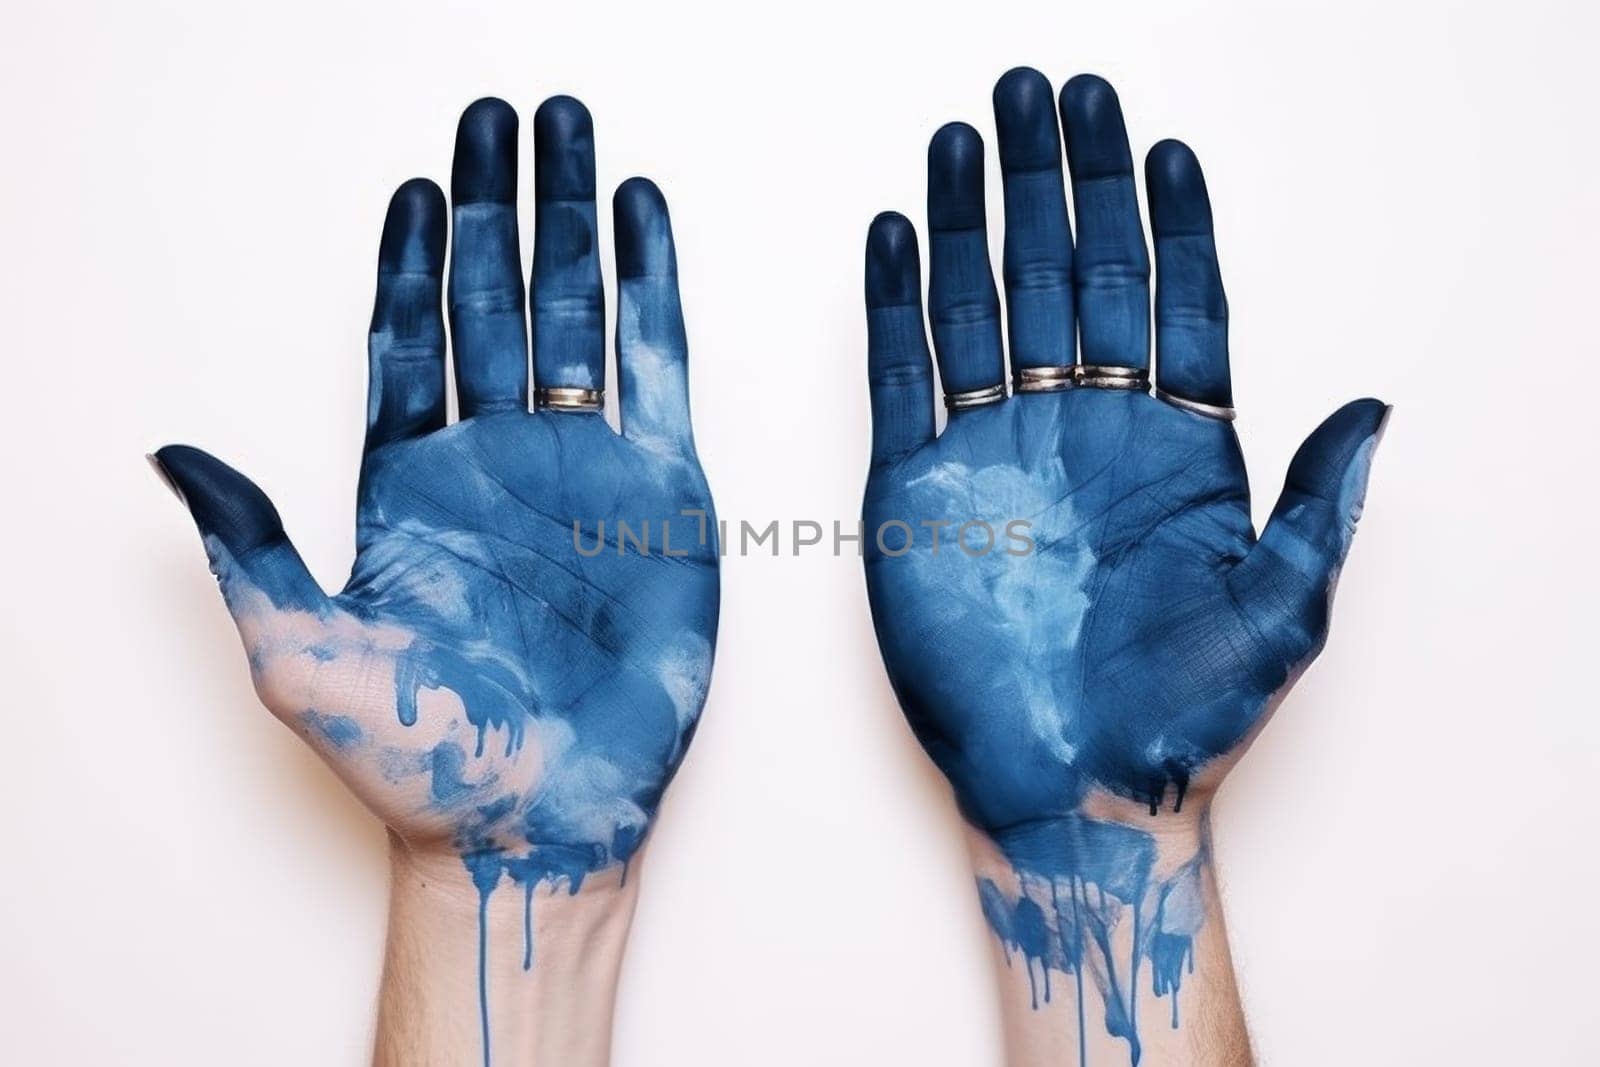 My hands are smeared with blue paint by Lobachad